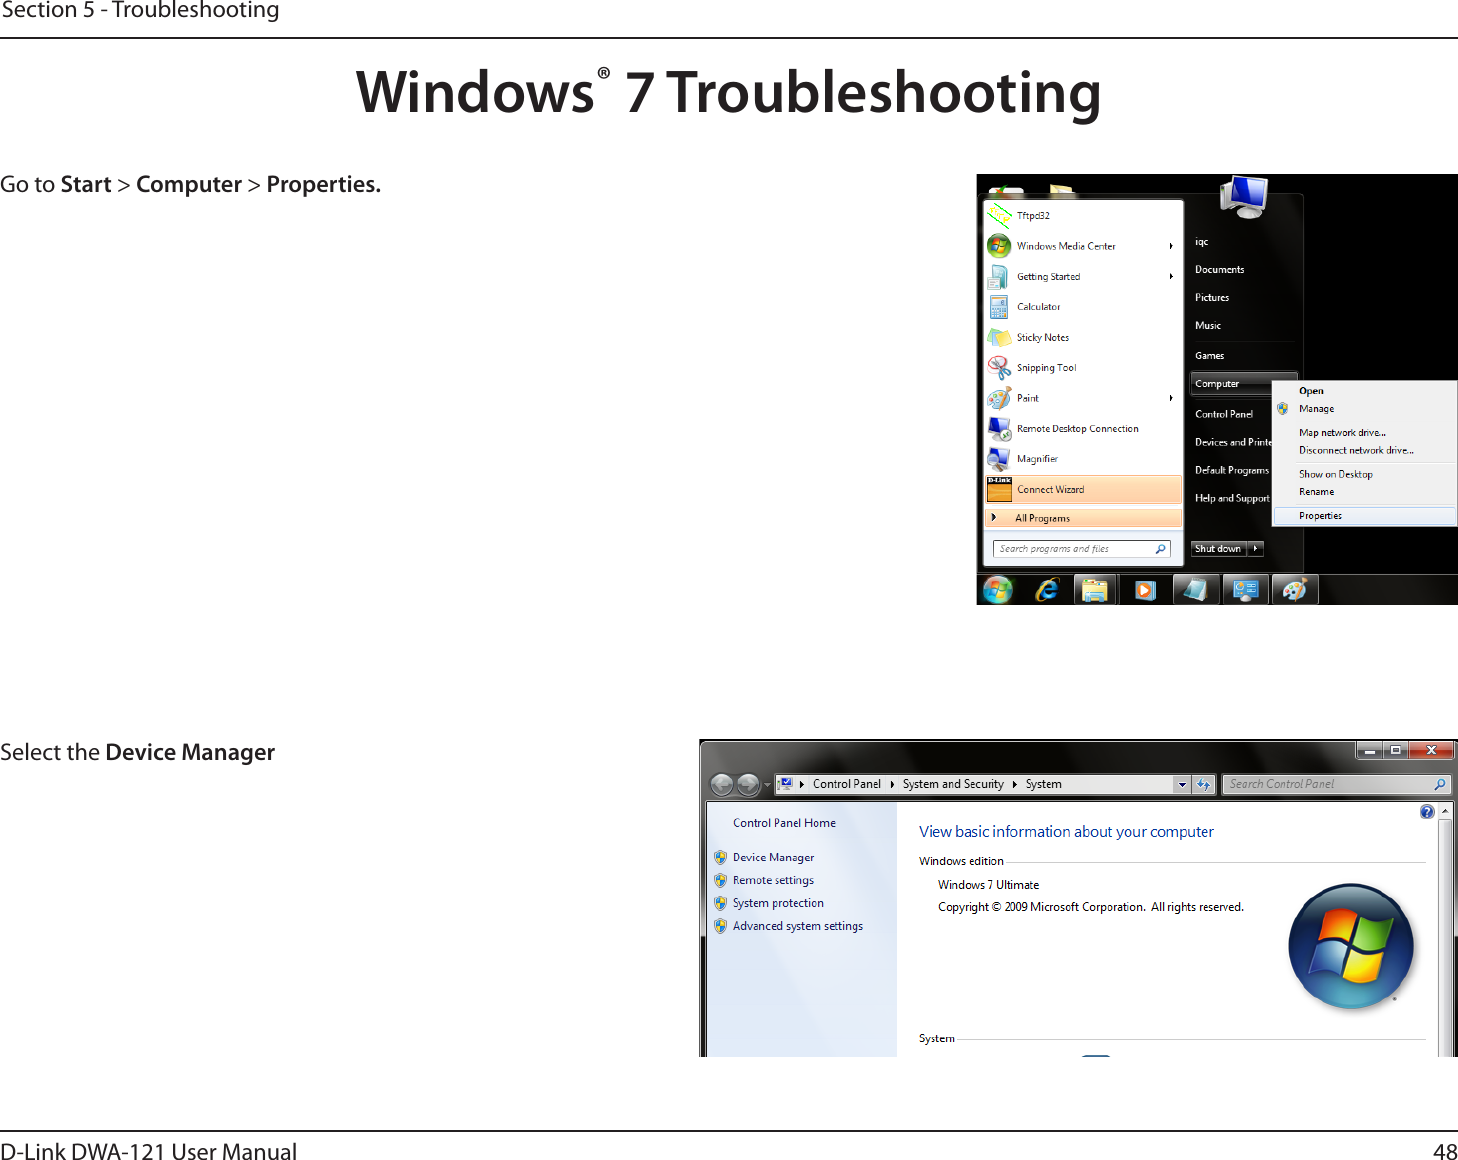 48D-Link DWA-121 User ManualSection 5 - TroubleshootingWindows® 7 TroubleshootingGo to Start &gt; Computer &gt; Properties.Select the Device Manager